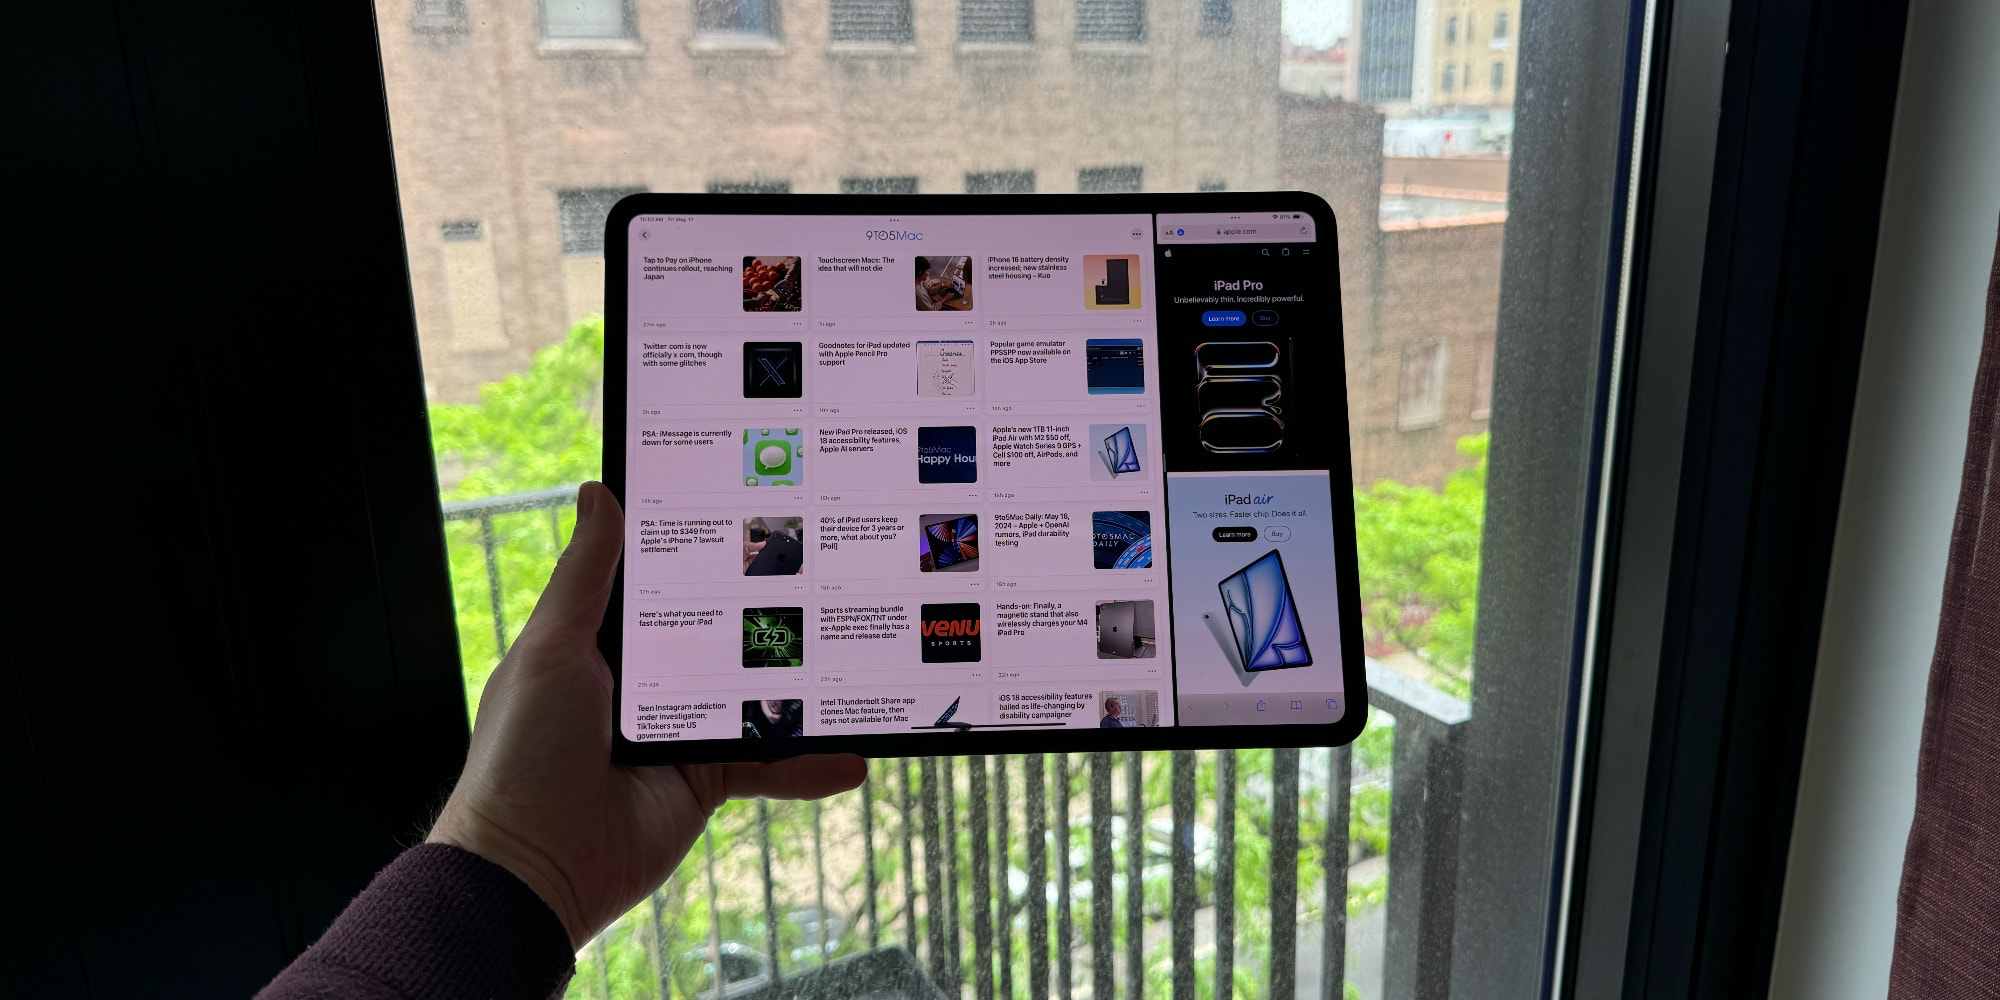 13-inch M4 iPad Pro using More Space